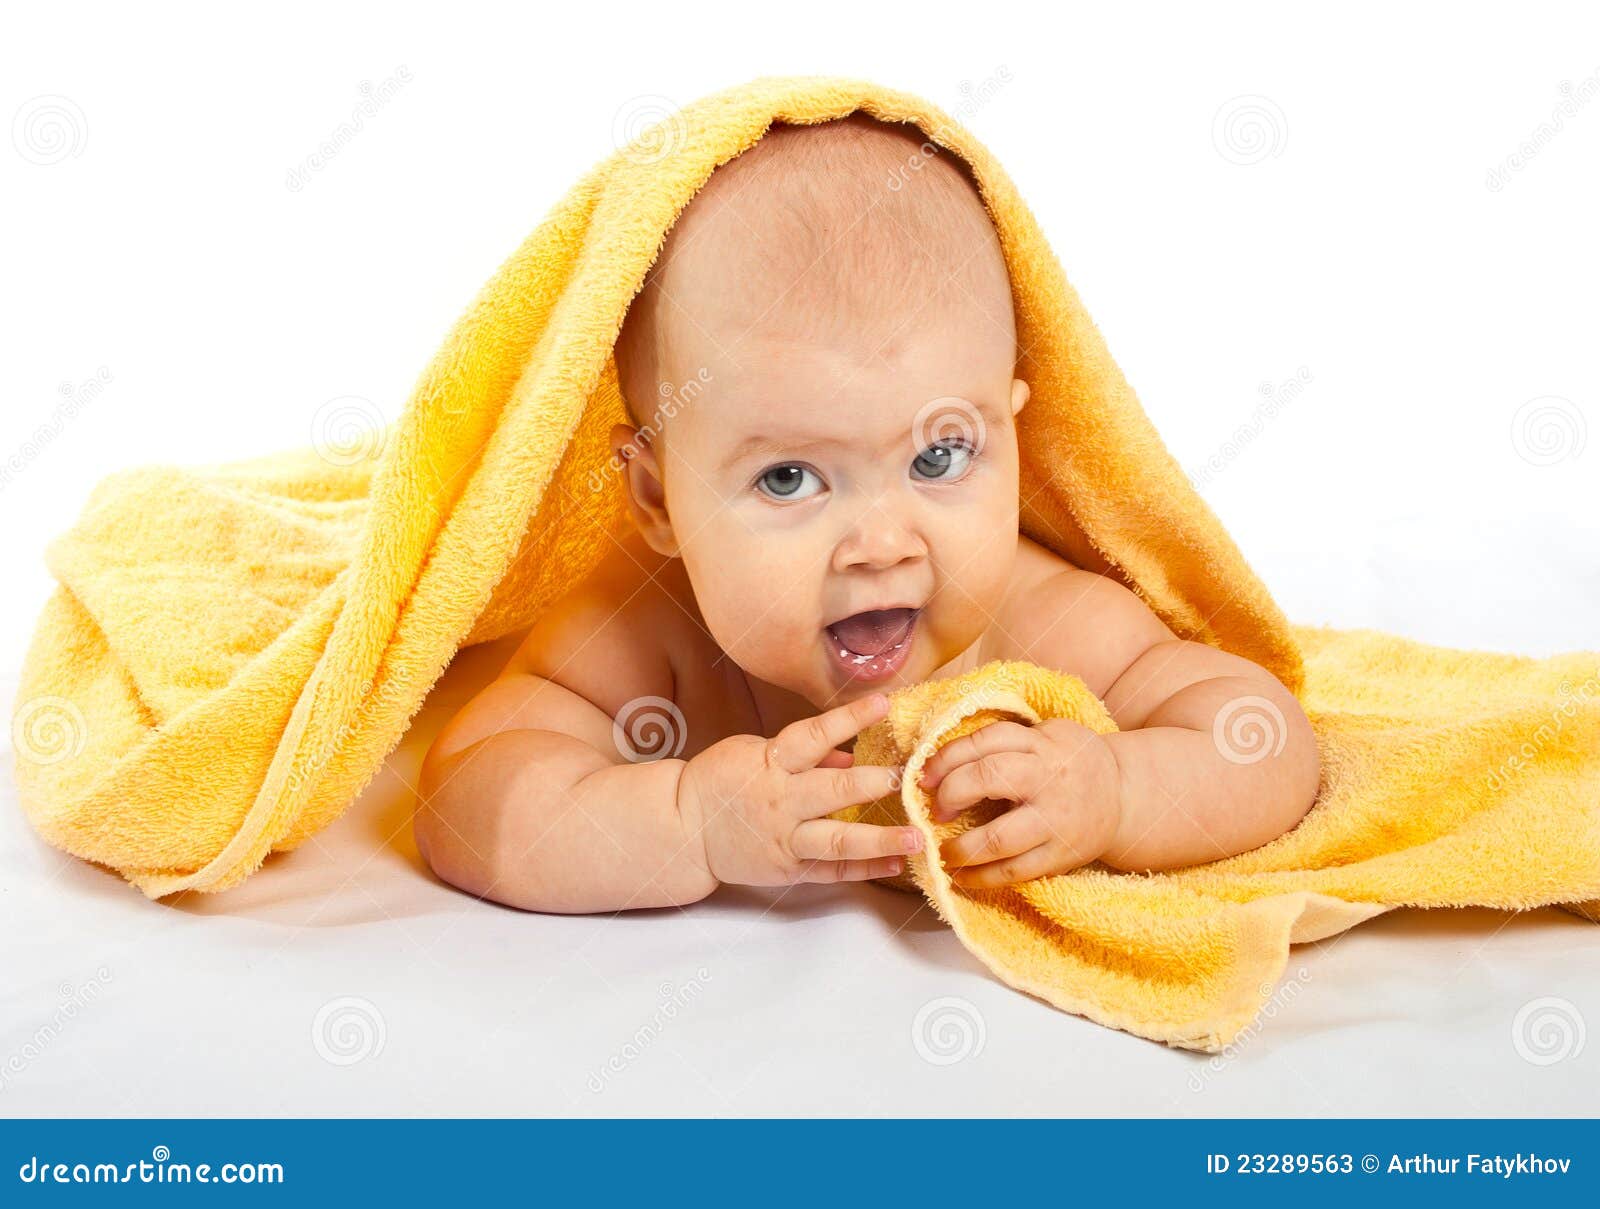 Newborn Girl on a White Background. Stock Image - Image of expression ...